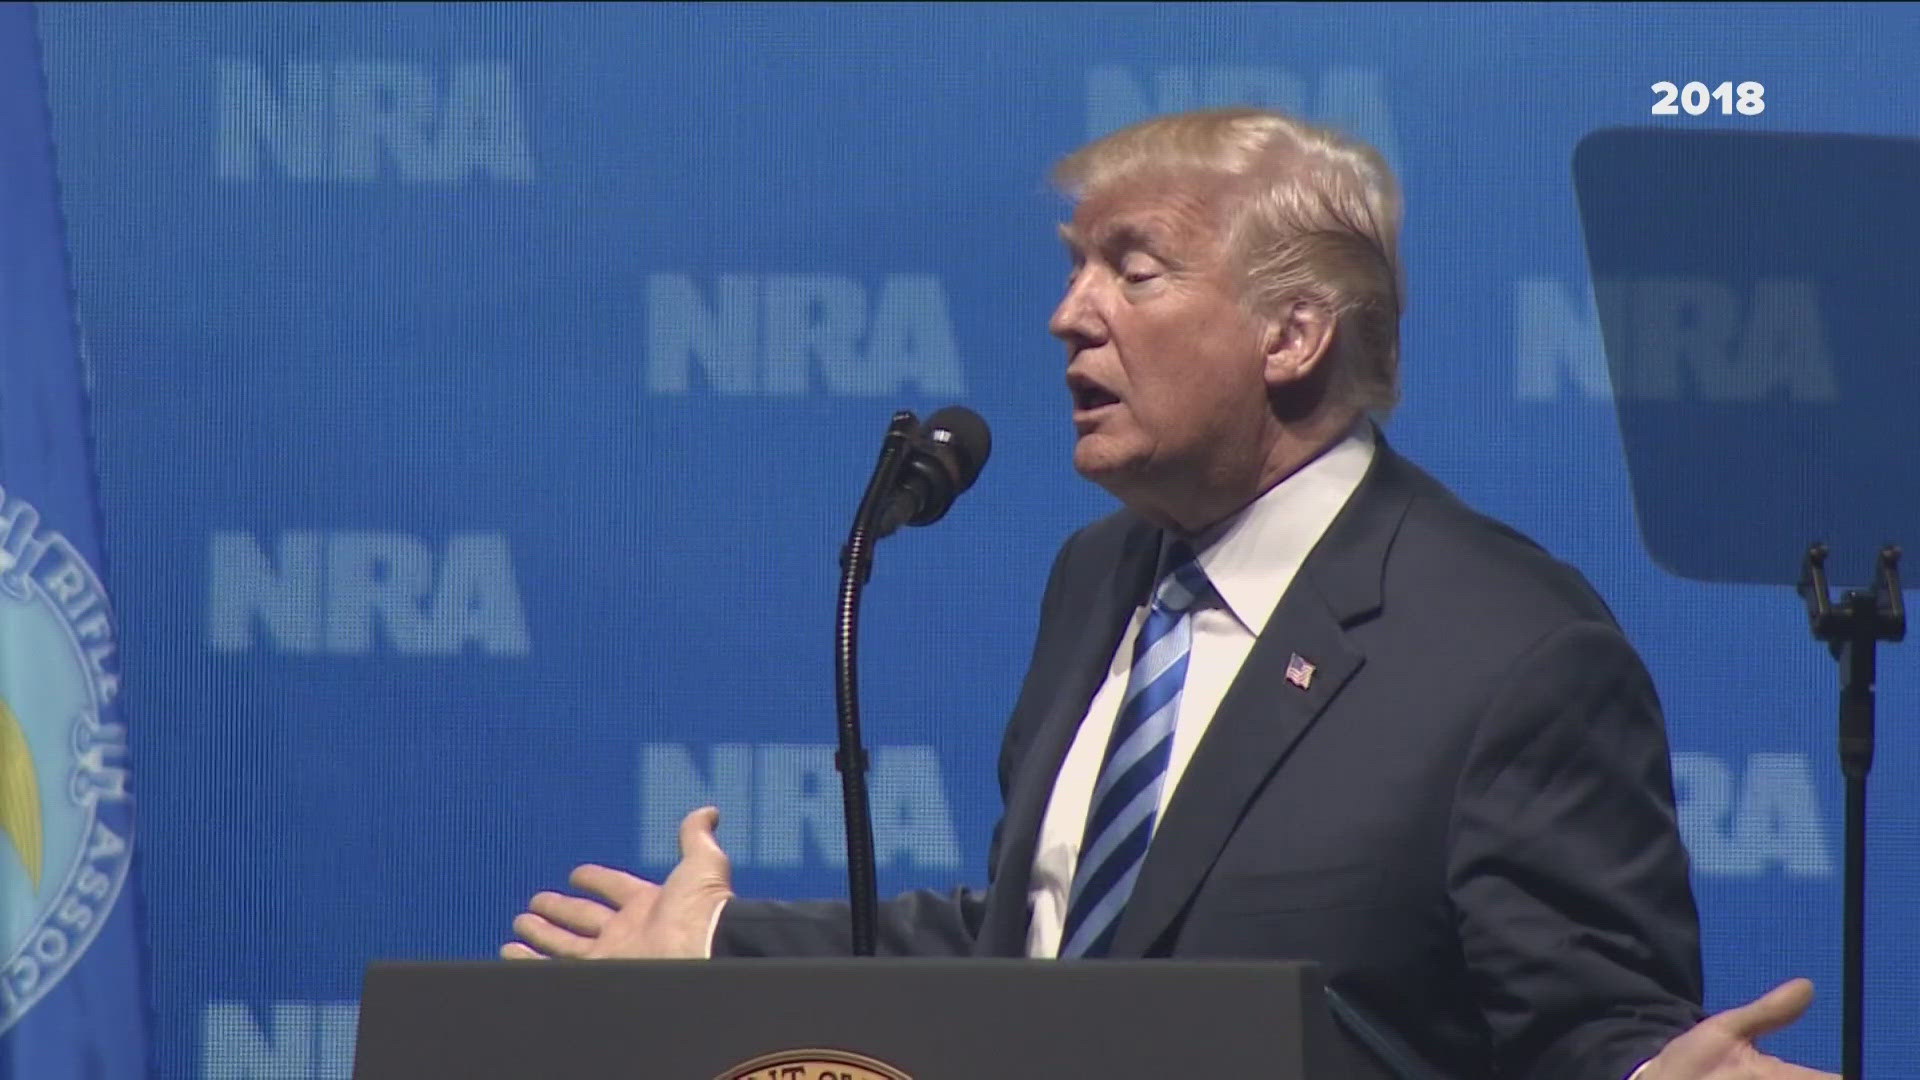 Former president Donald Trump will speak at the National Rifle Association's annual convention in Dallas this weekend.